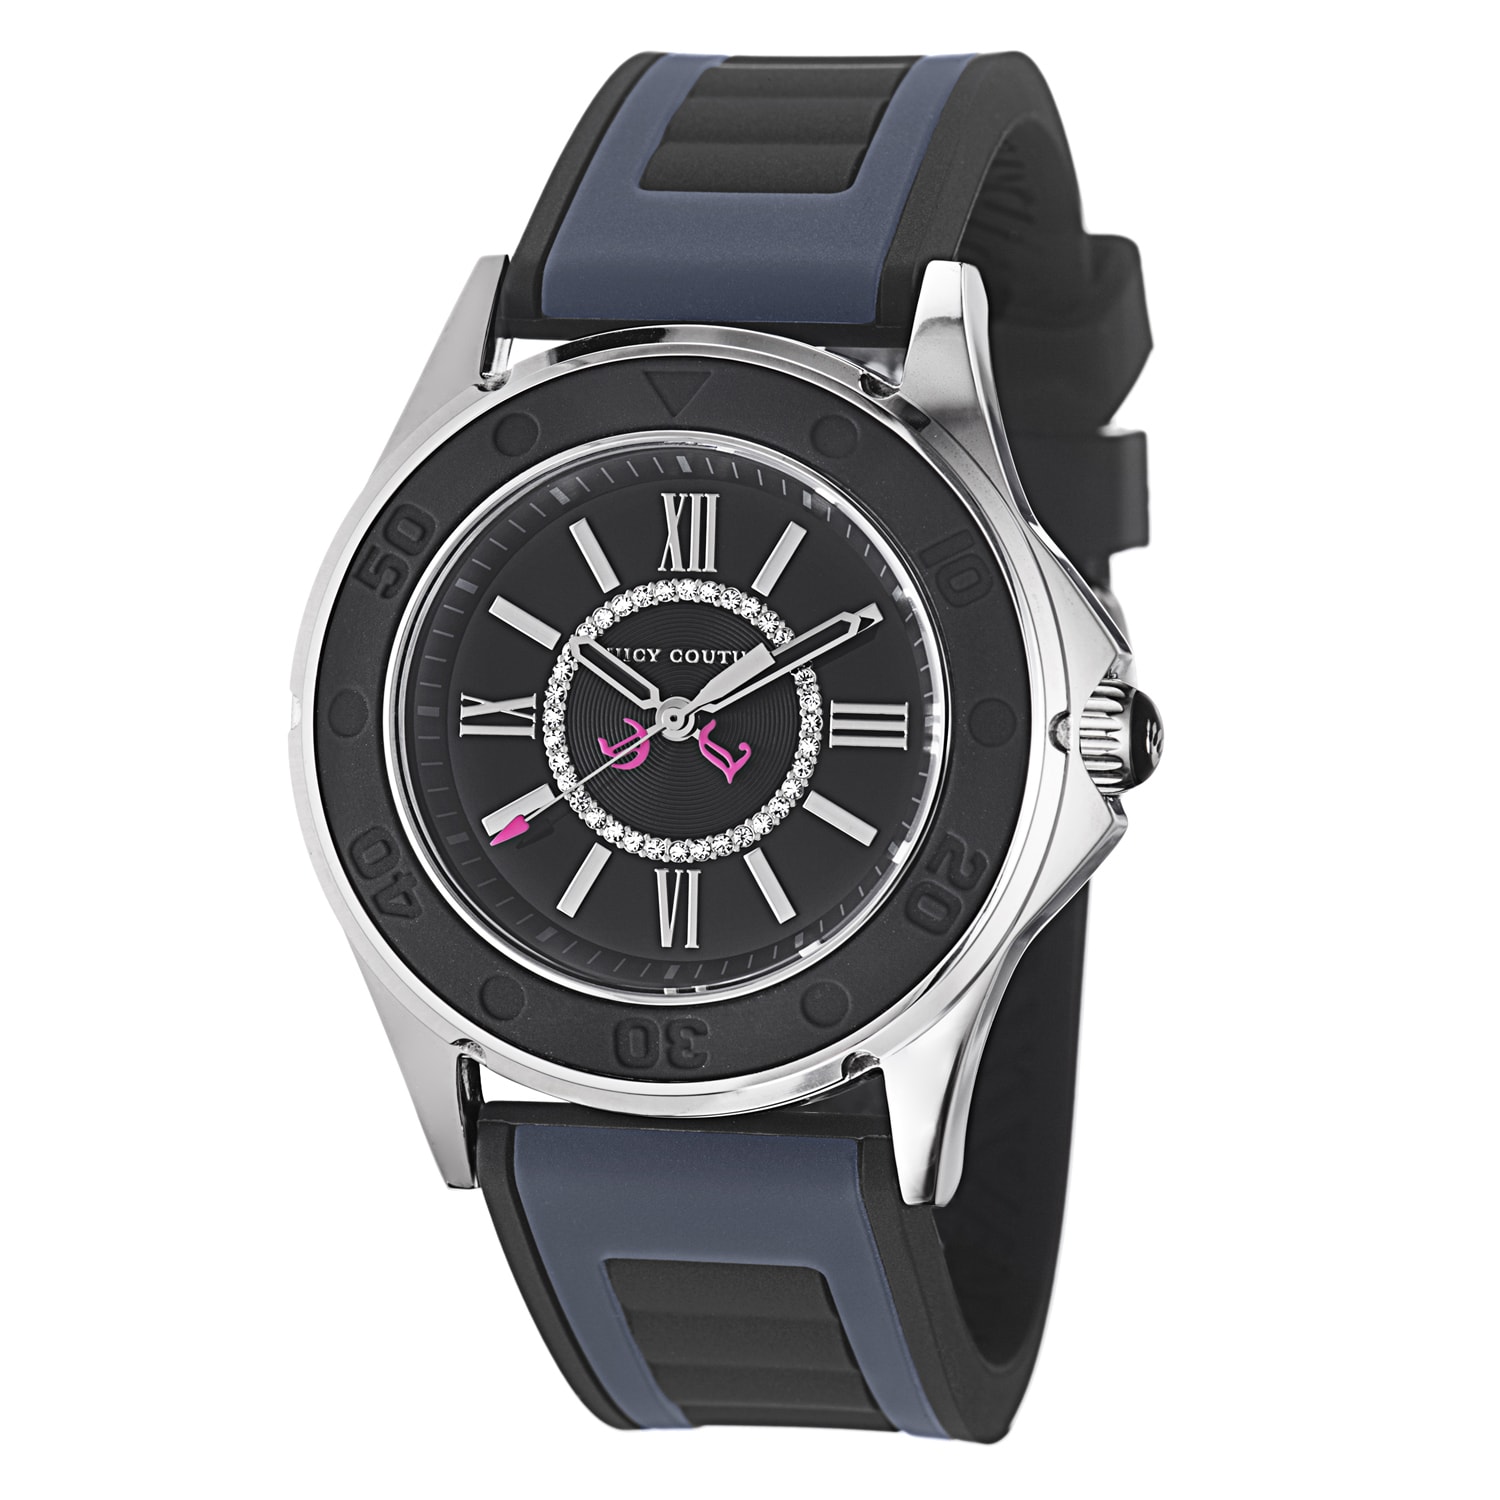 Juicy Couture Women's 'Rich Girl' Navy Stainless Steel Watch